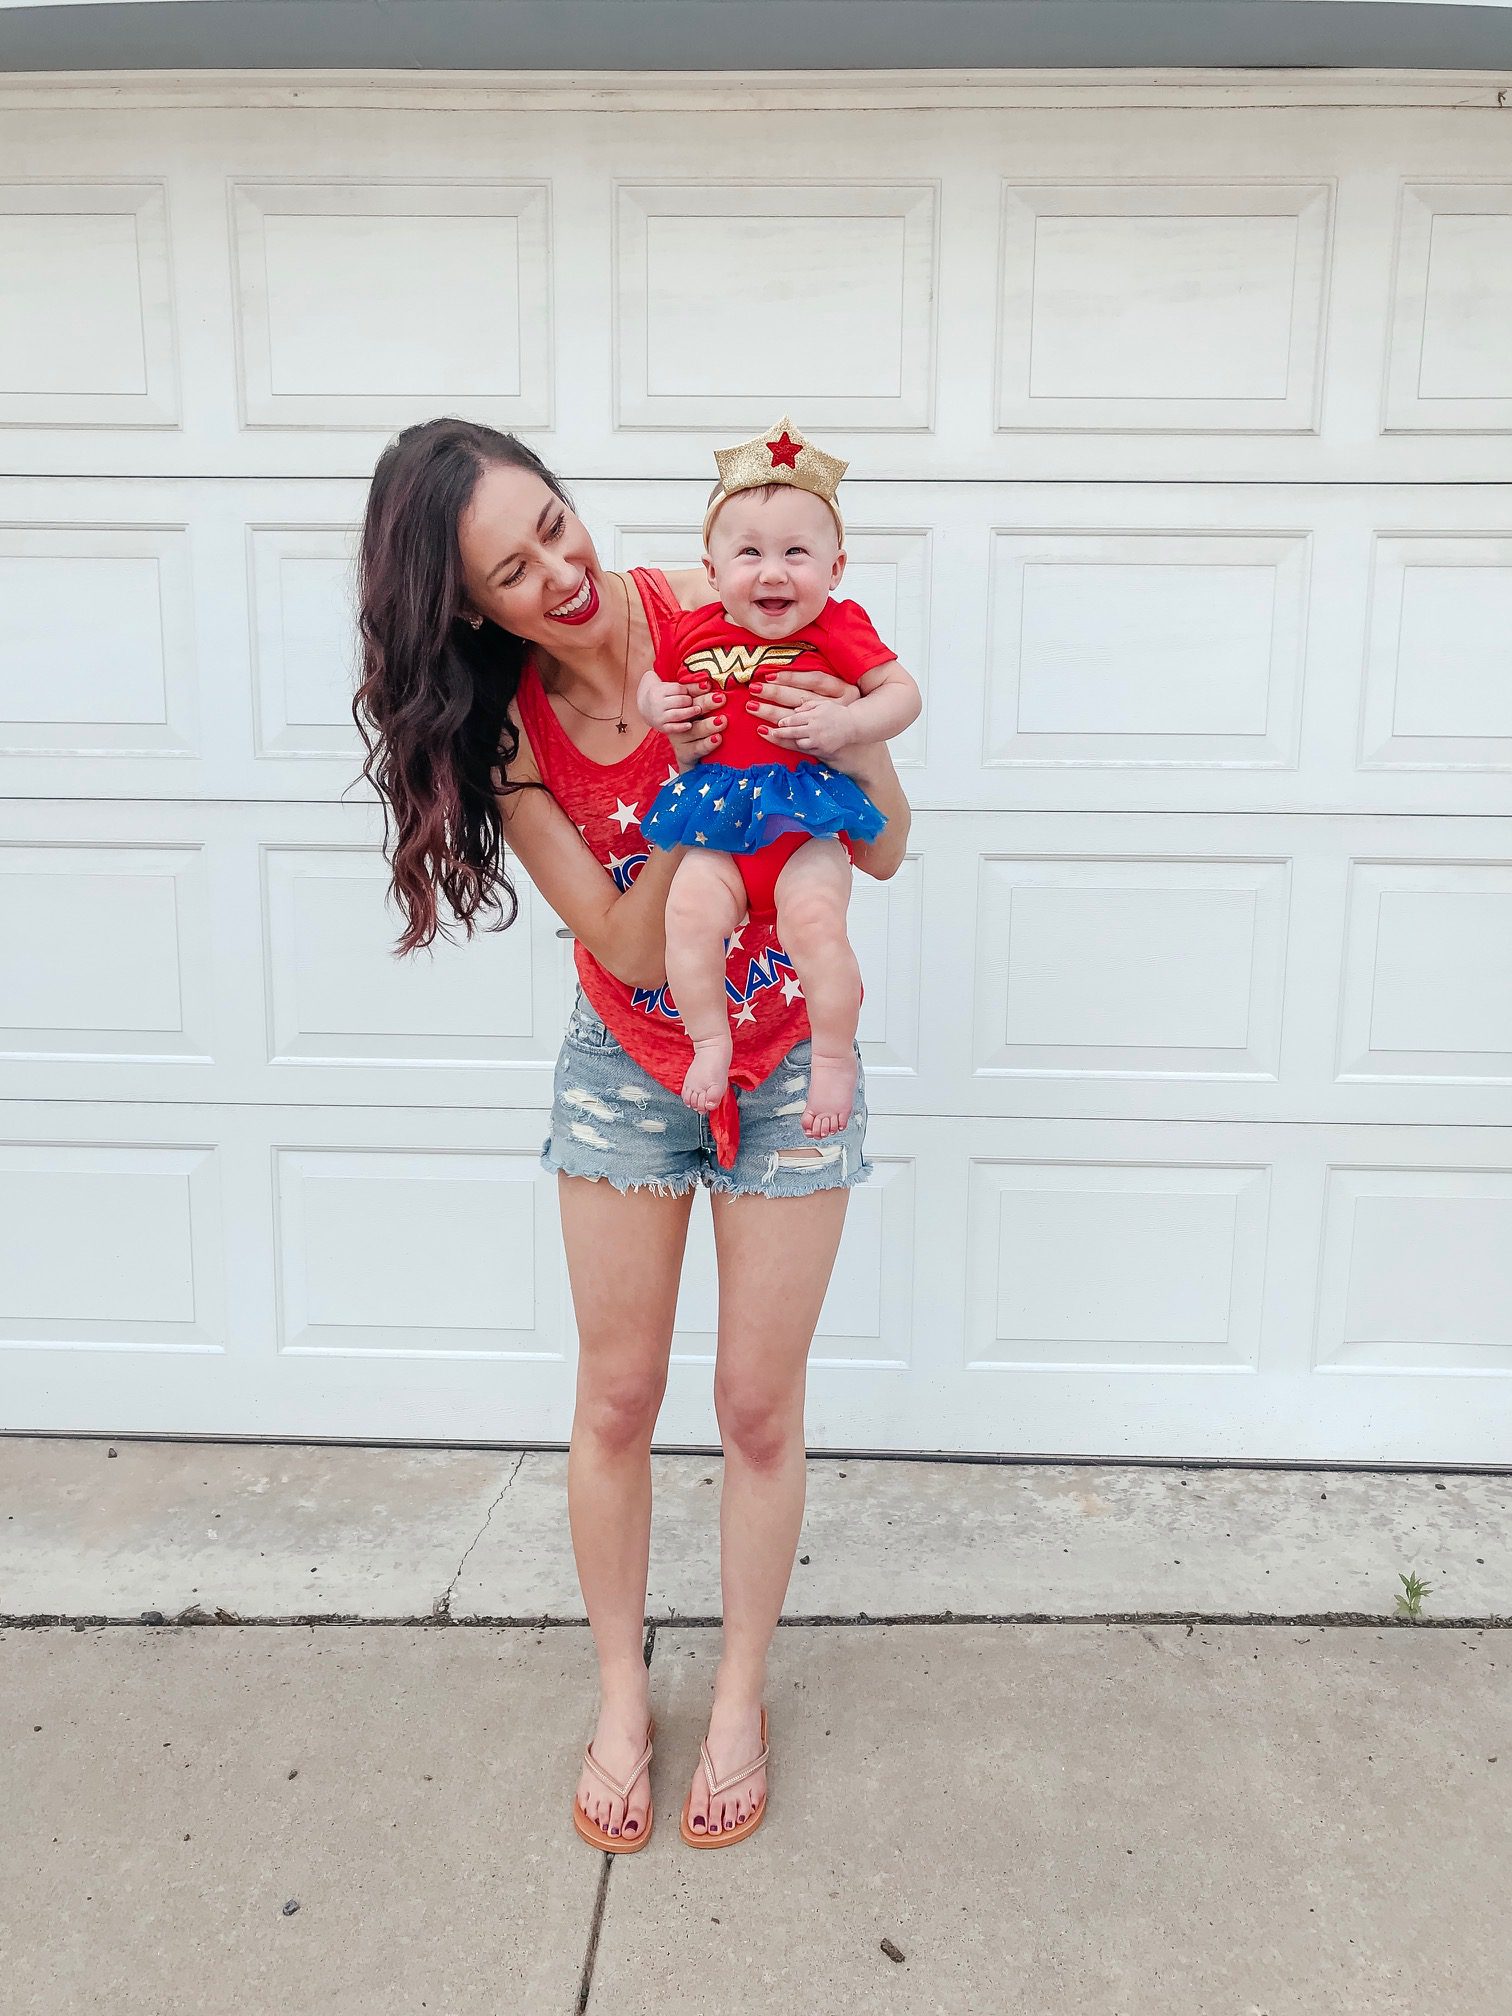 Wonder Woman - Updates on Olivia Grace, Coming Up Roses